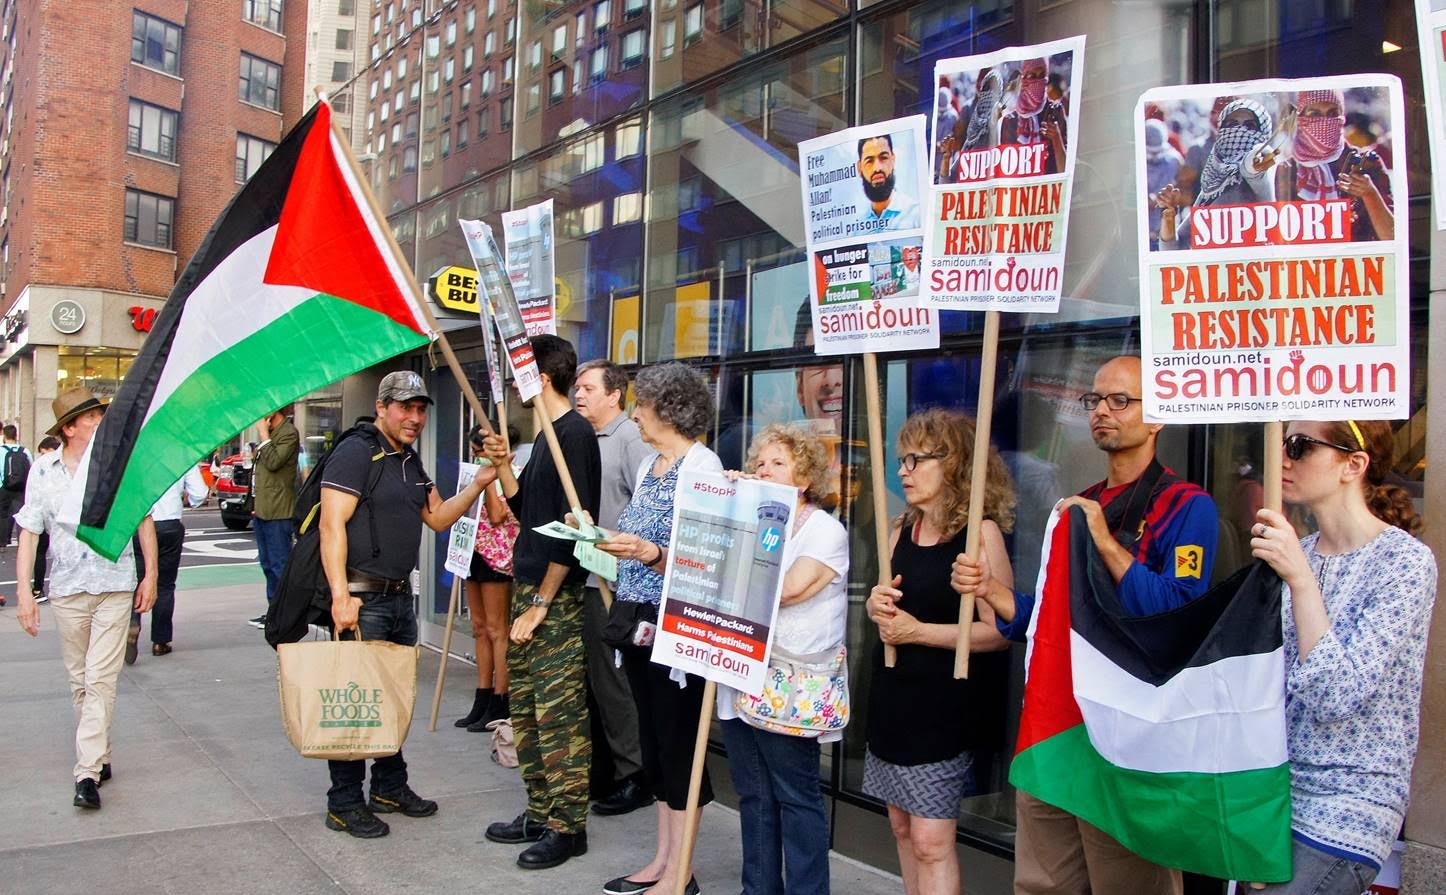 New York City Protesters Demand Freedom For Muhammad Allan On 30th Day Of Hunger Strike